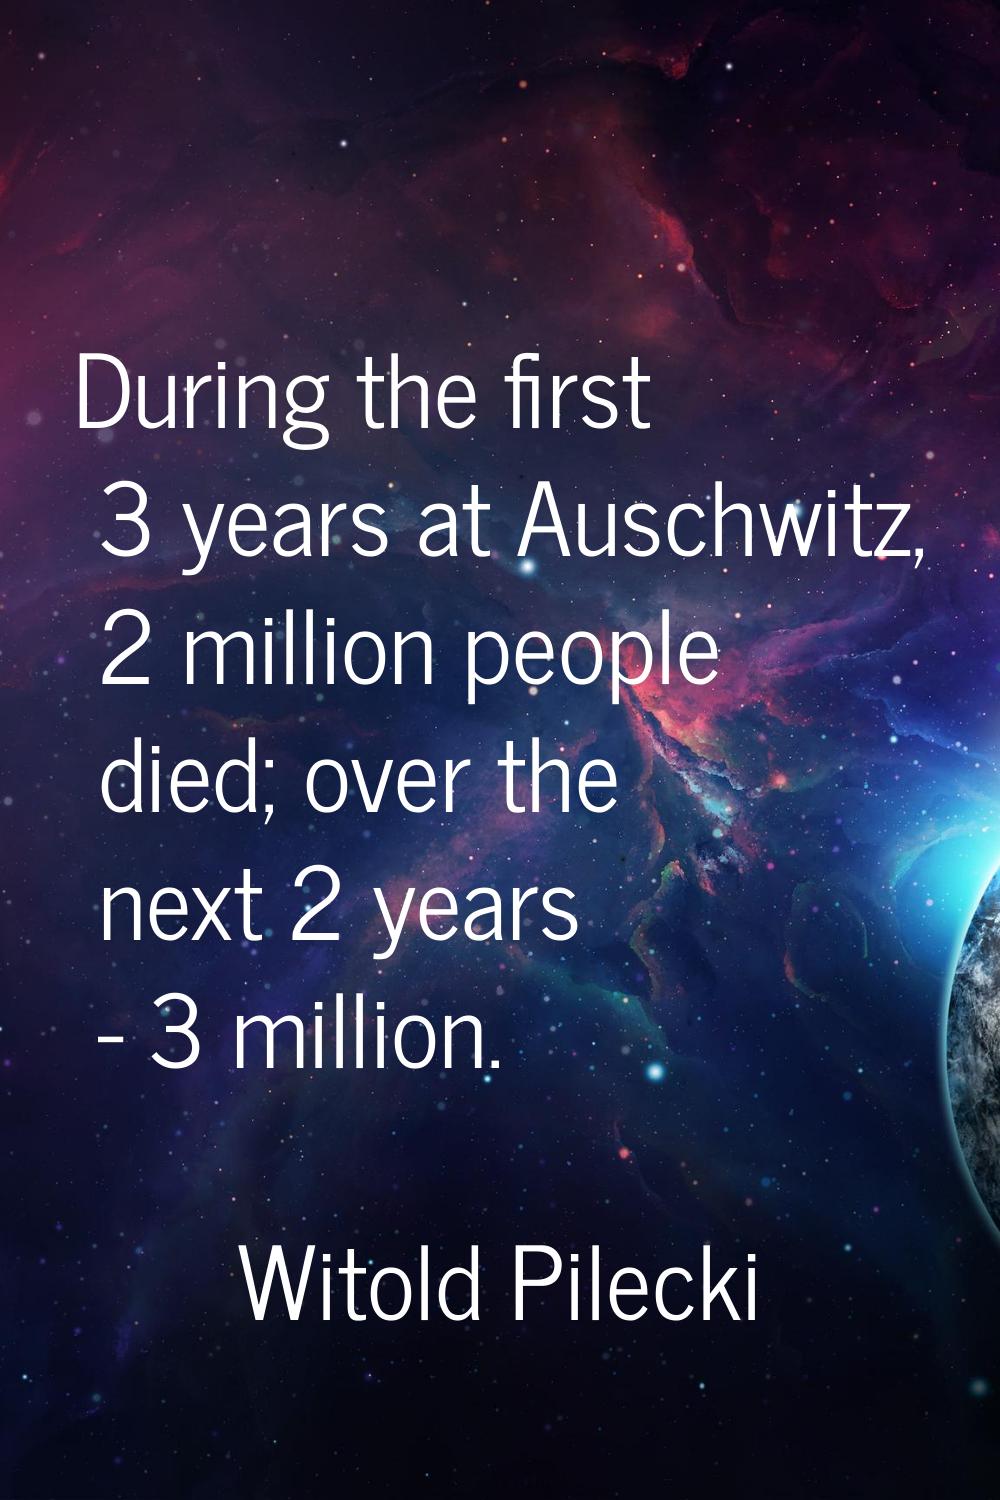 During the first 3 years at Auschwitz, 2 million people died; over the next 2 years - 3 million.